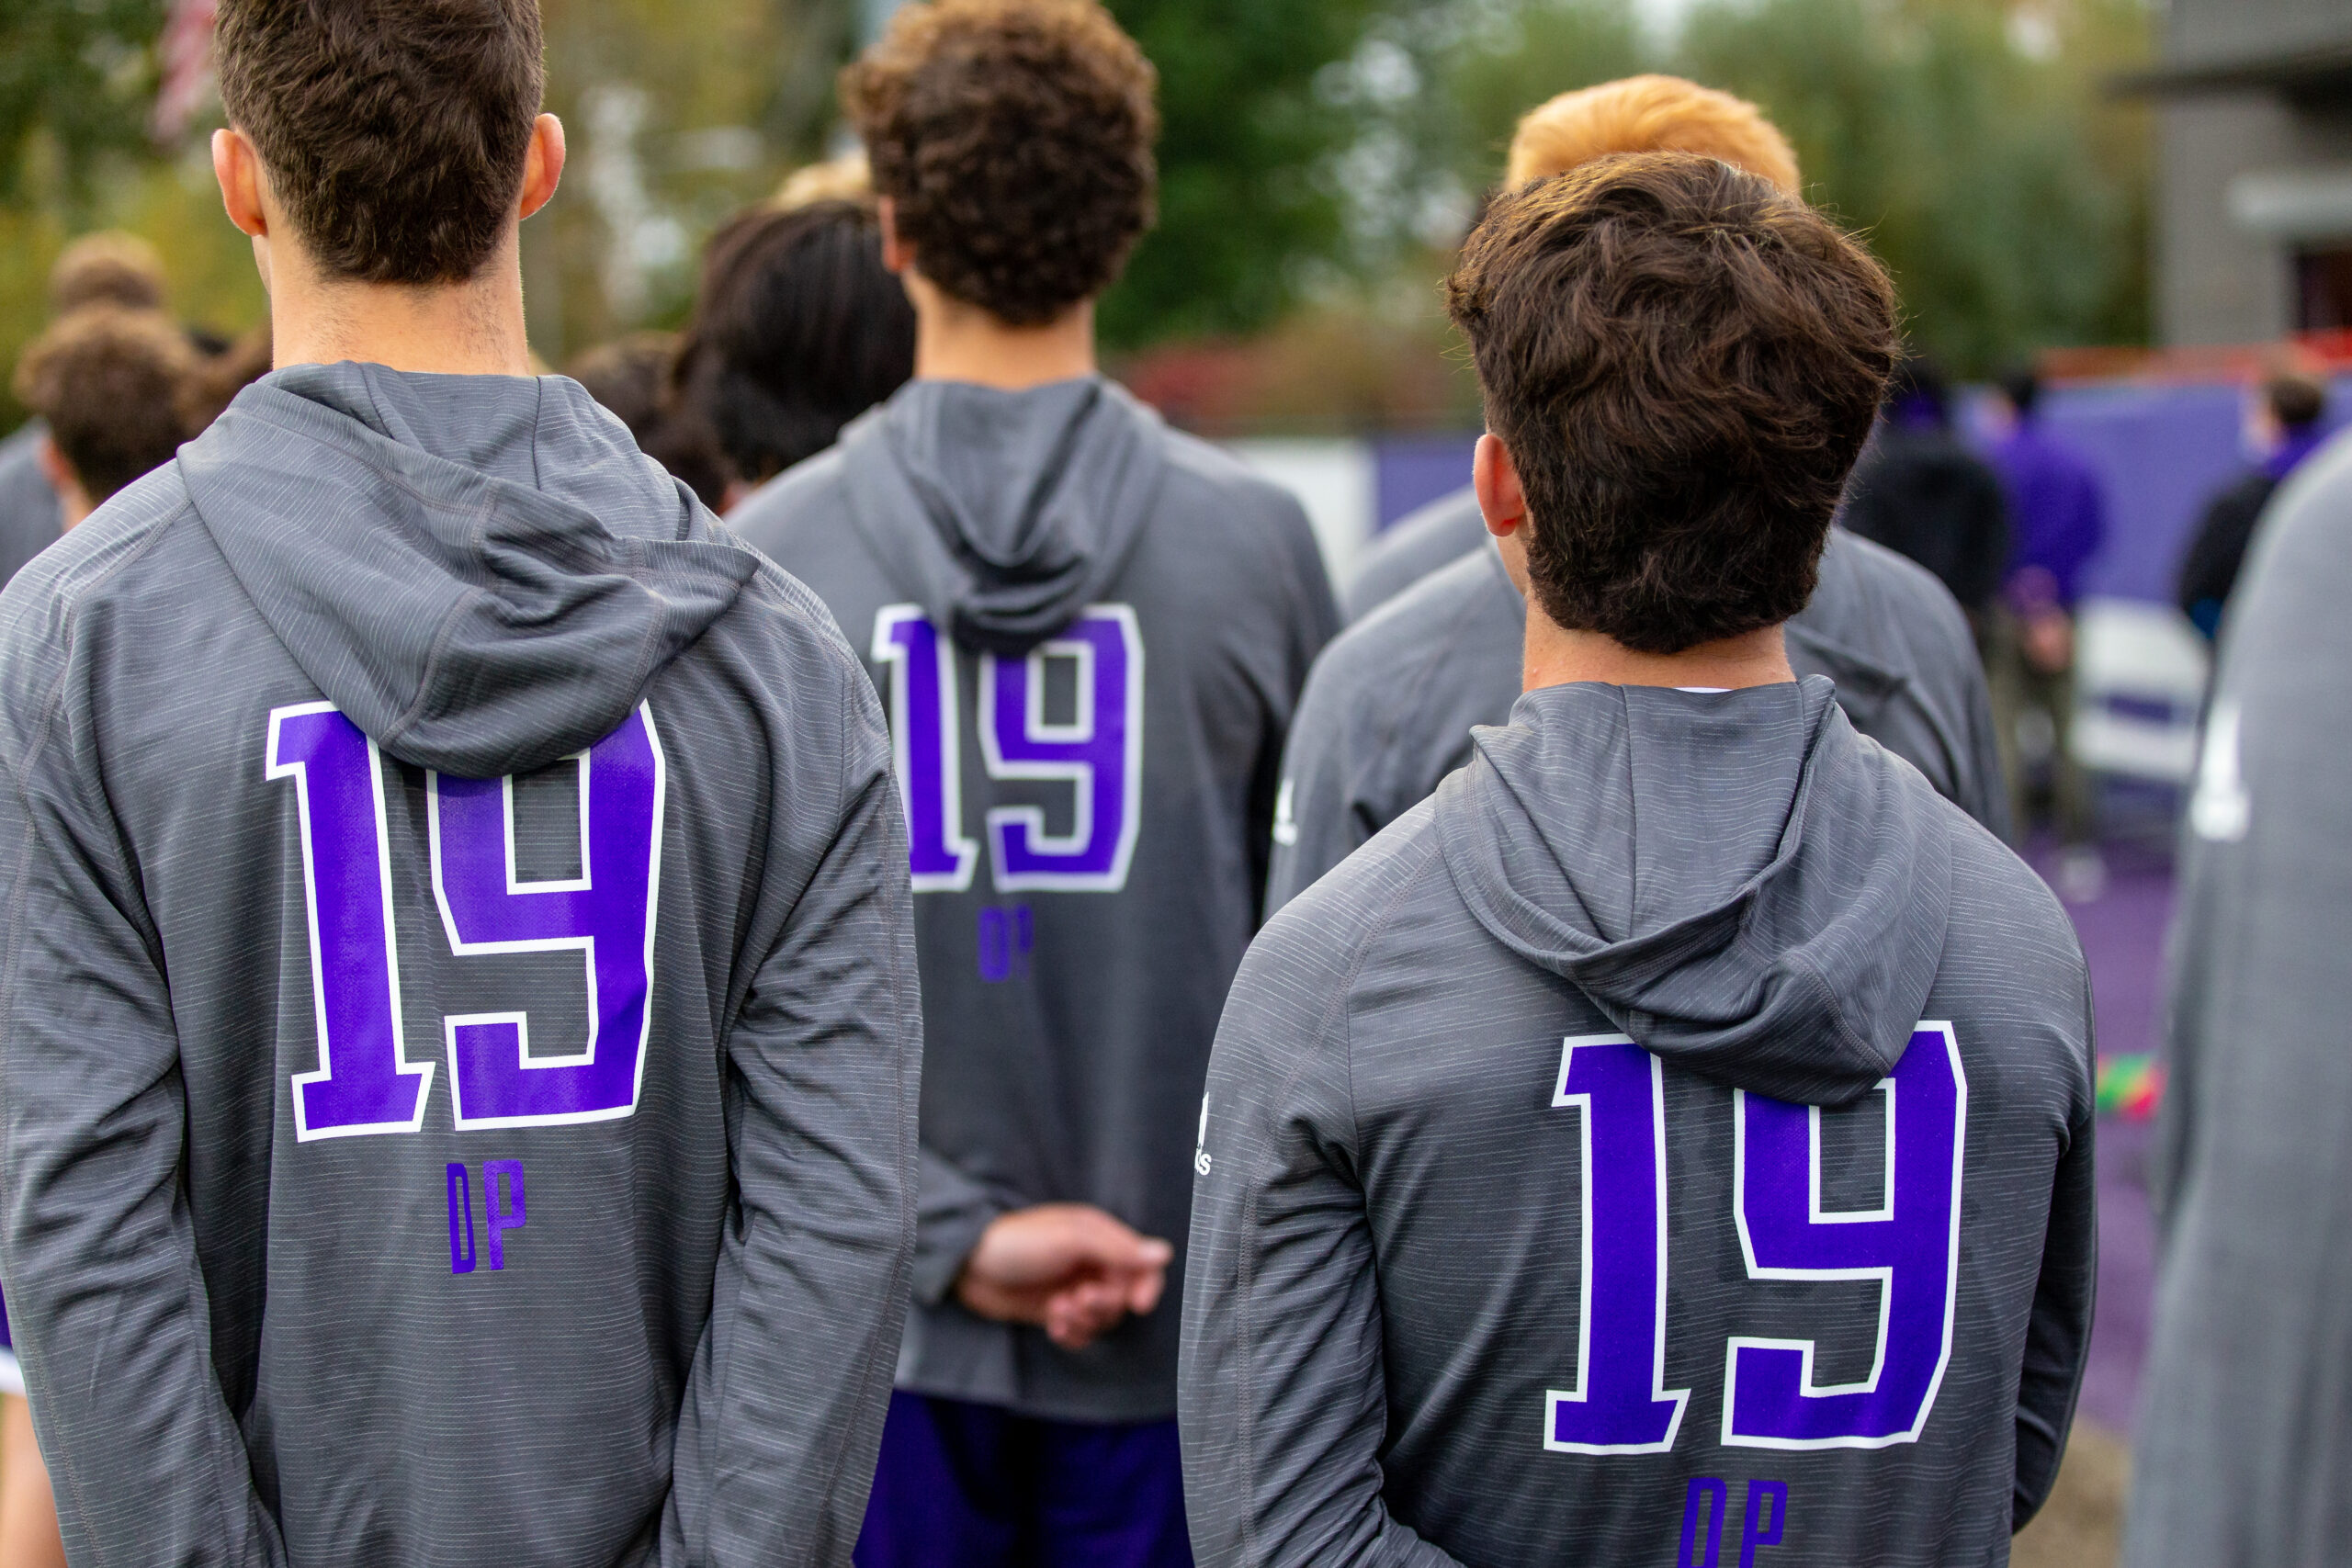 The University of Washington men's soccer team plays Oregon State on October 22, 2021. (Photography by Scott Eklund/Red Box Pictures)